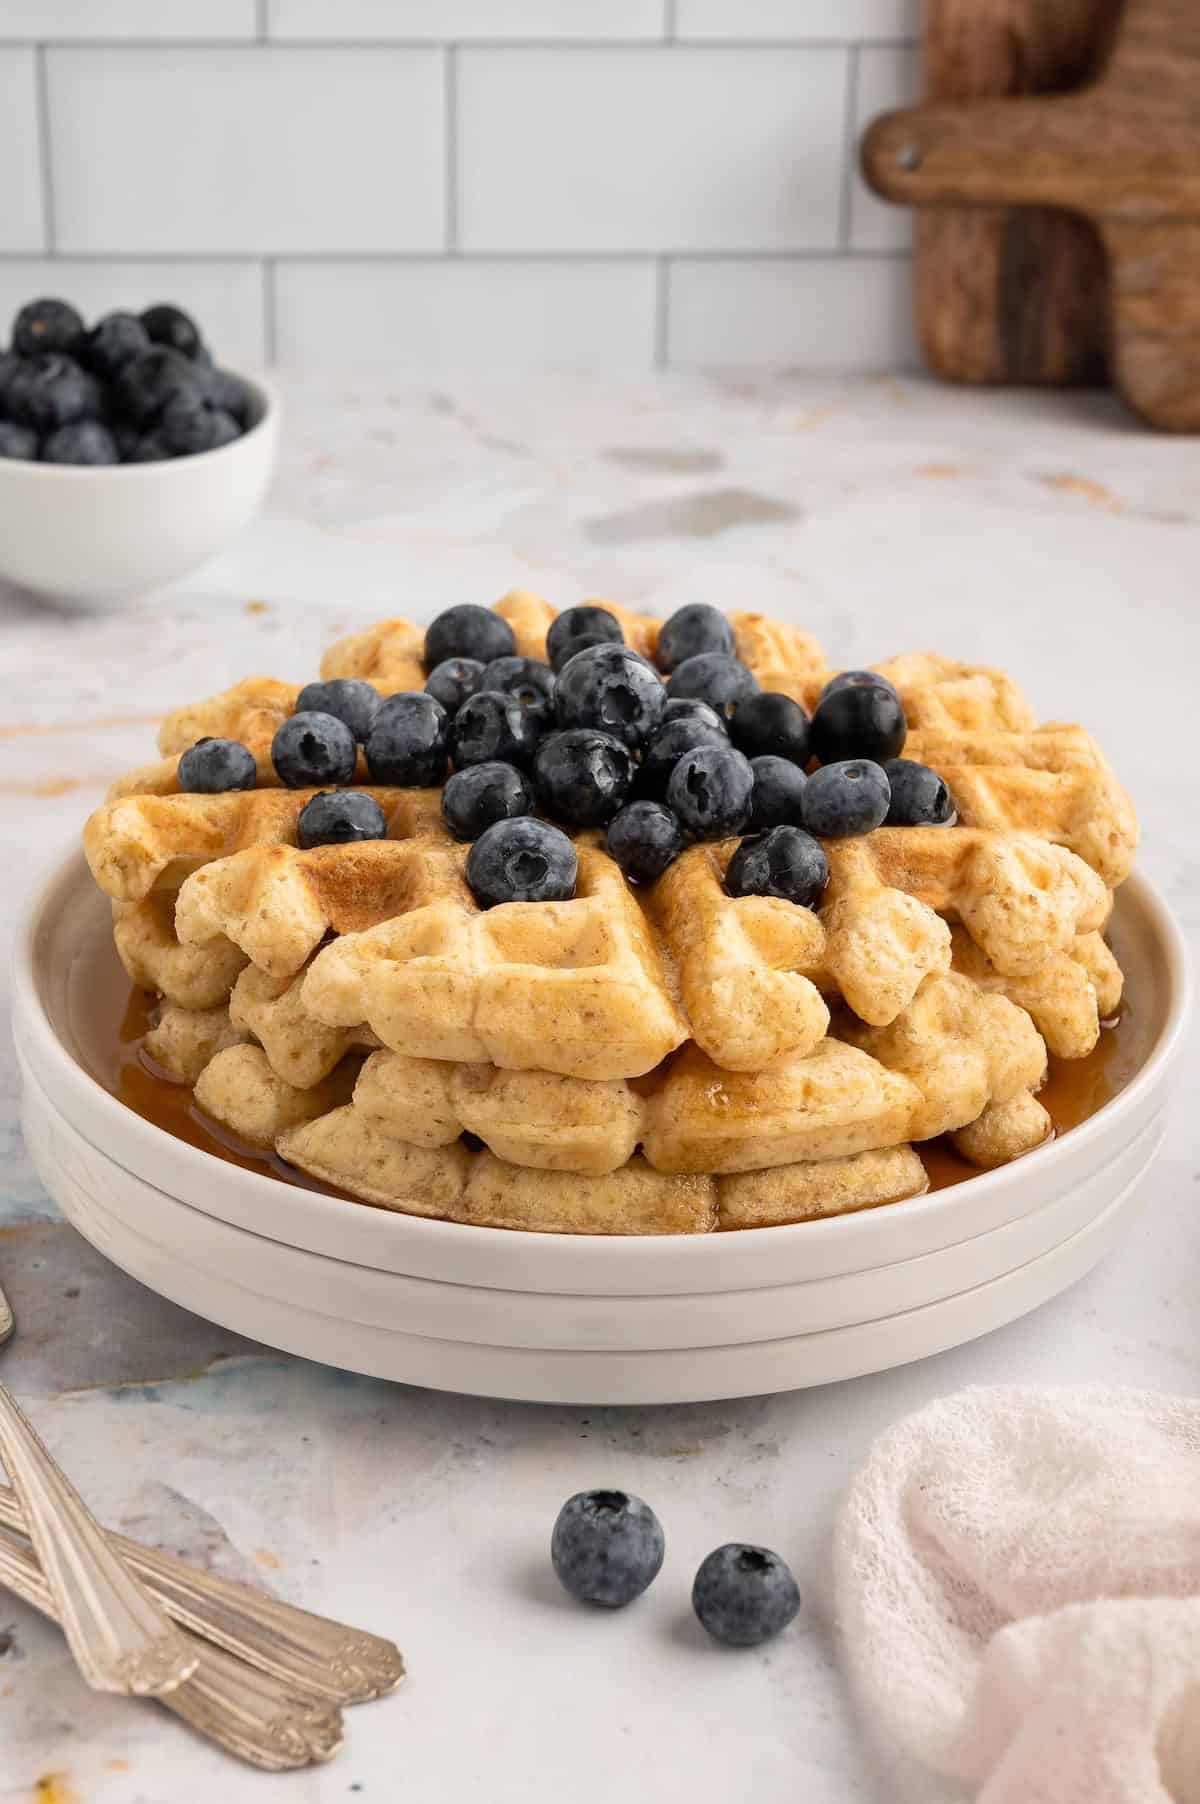 A stack of vegan waffles, topped with blueberries.